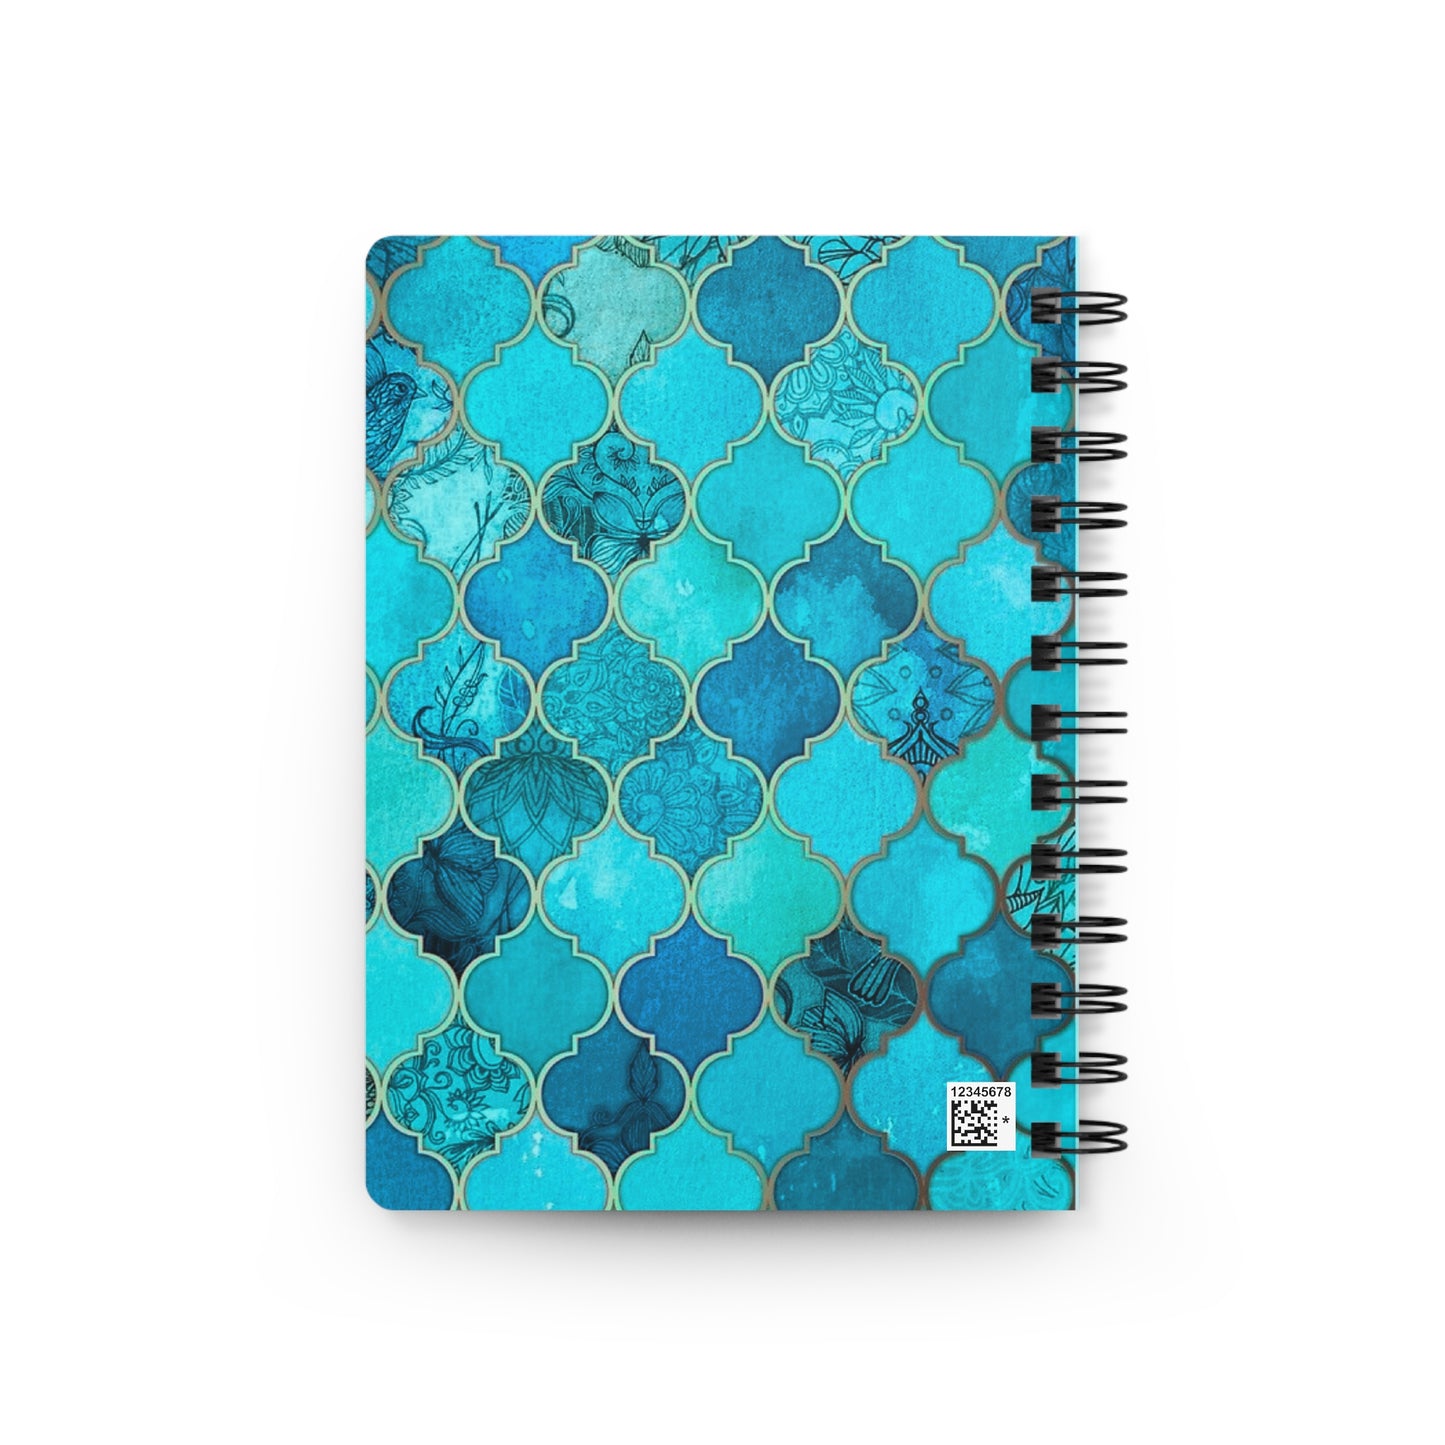 Teal and Turquoise Arabesque Tile Marrakech Moroccan Writing Travel Sketch Spiral Bound Journal